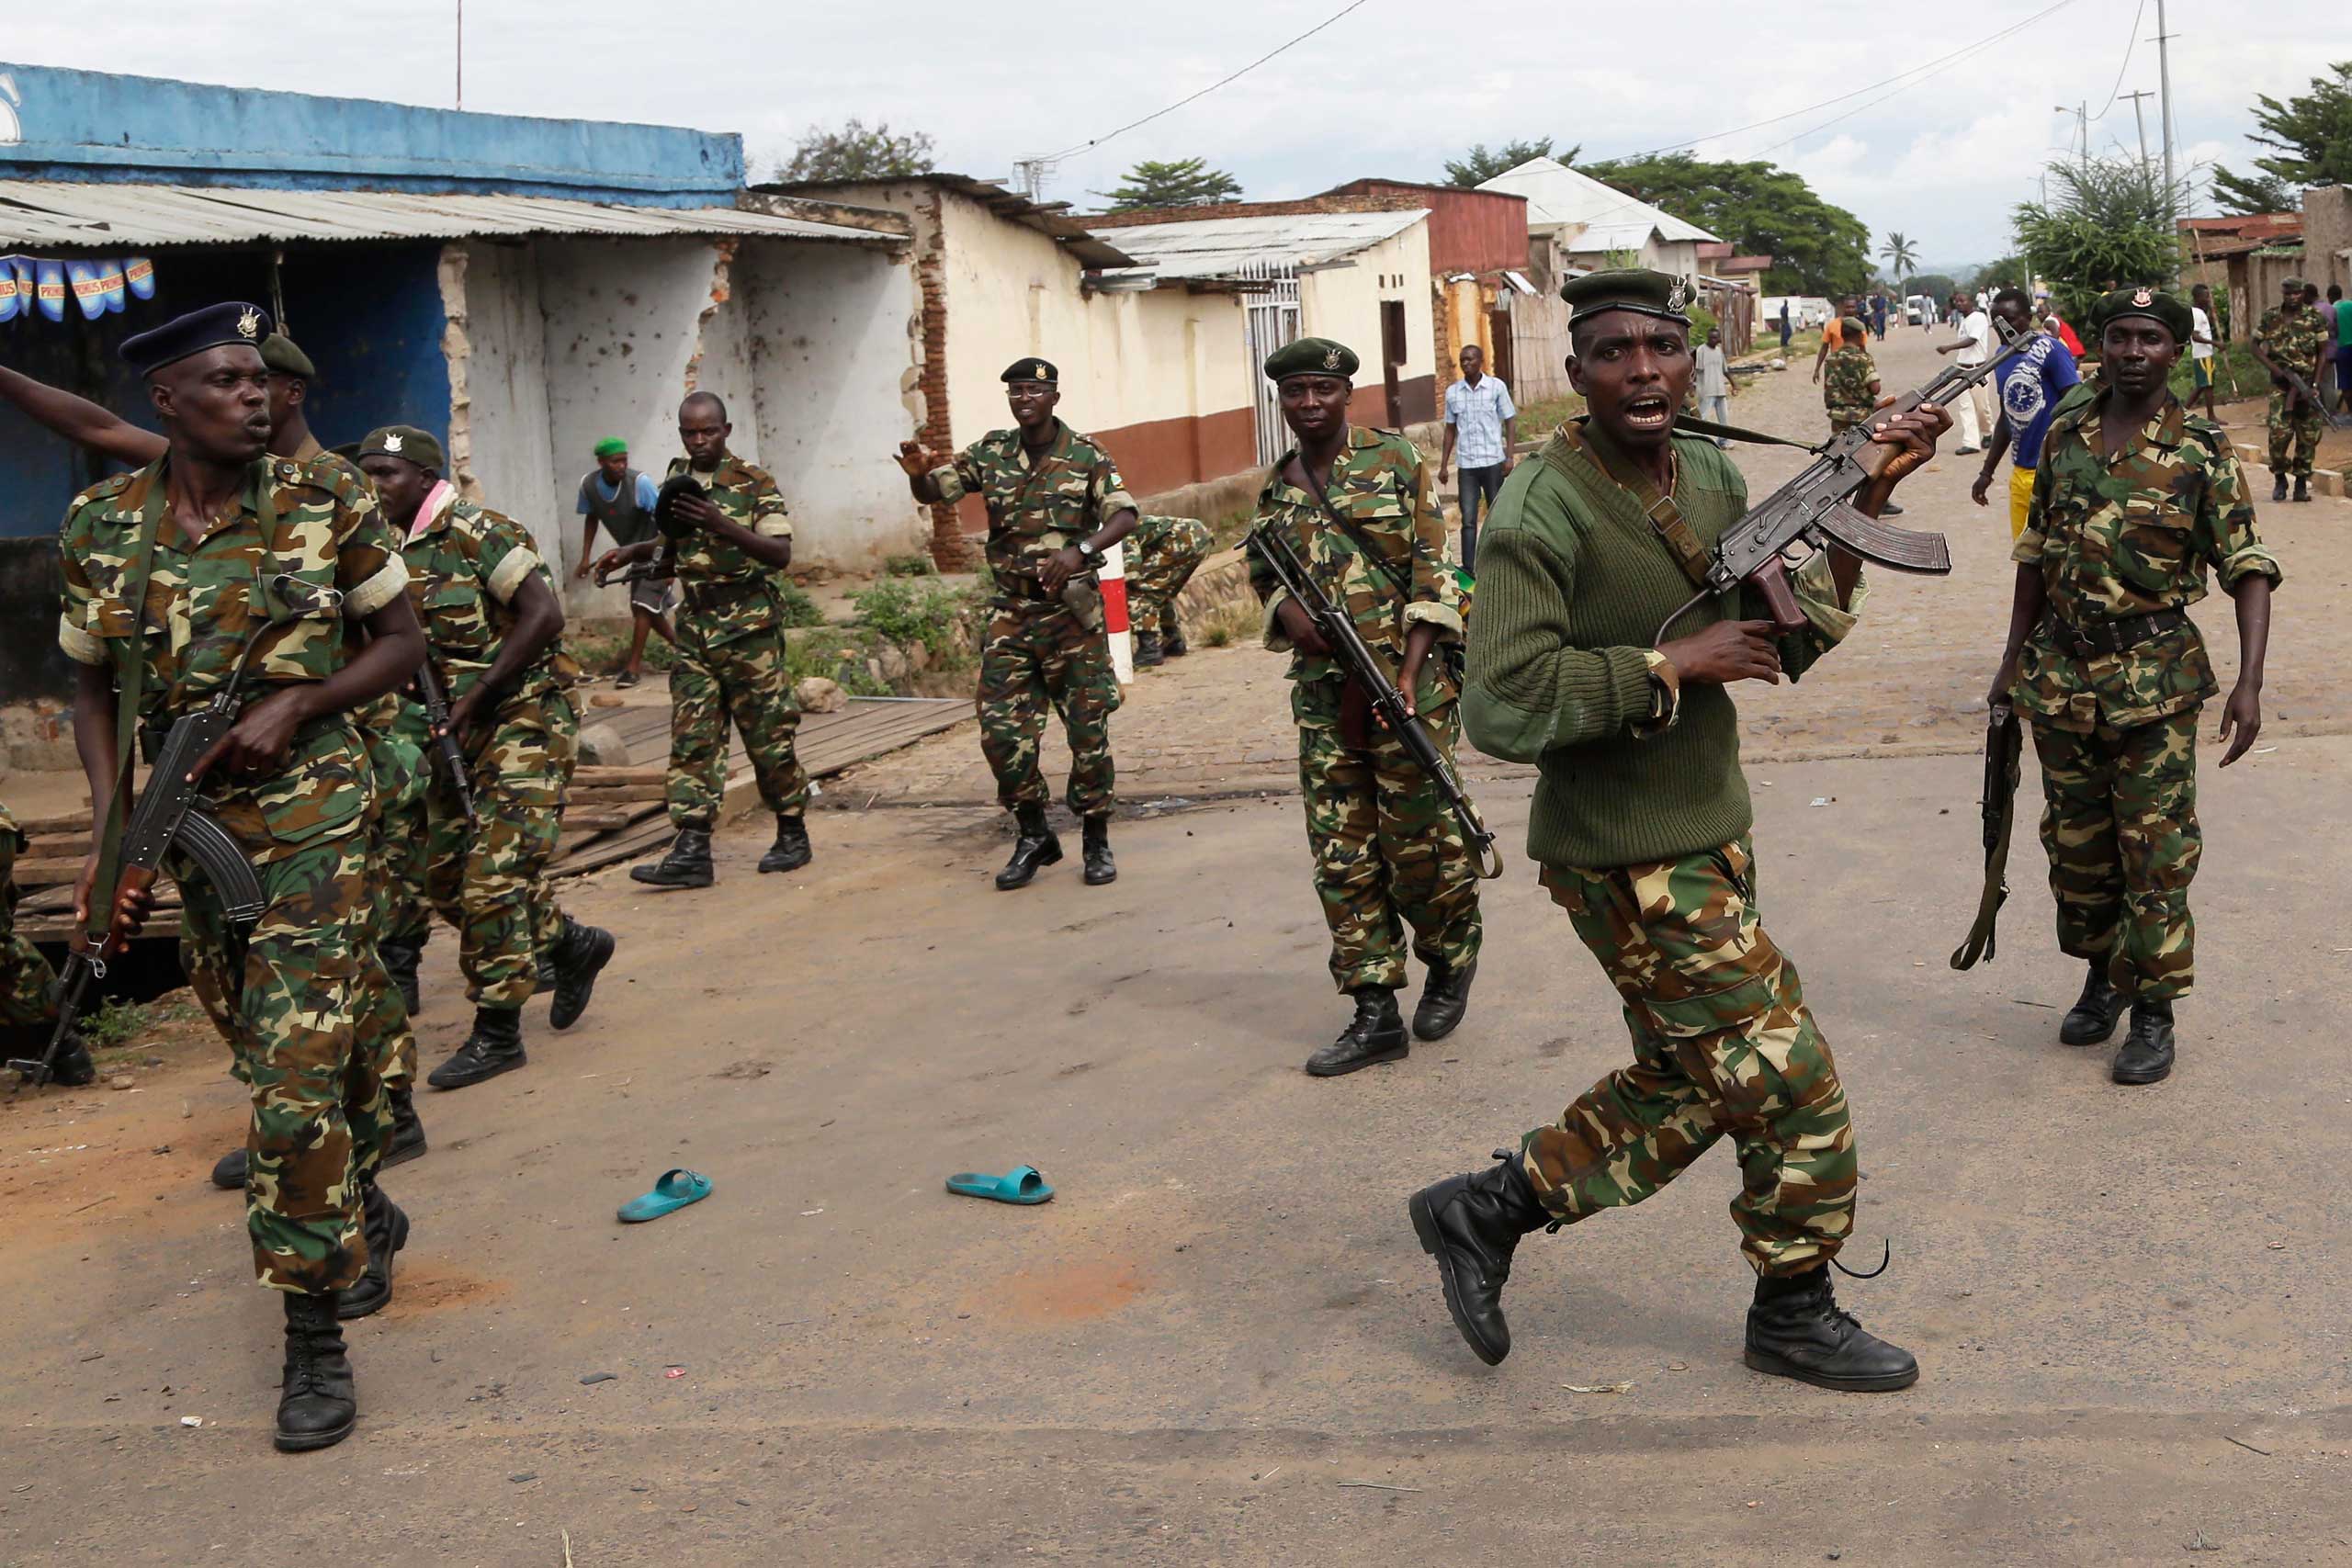 Soldiers disperse a crowd by firing into the air after demonstrators cornered Niyonzima in a sewer.